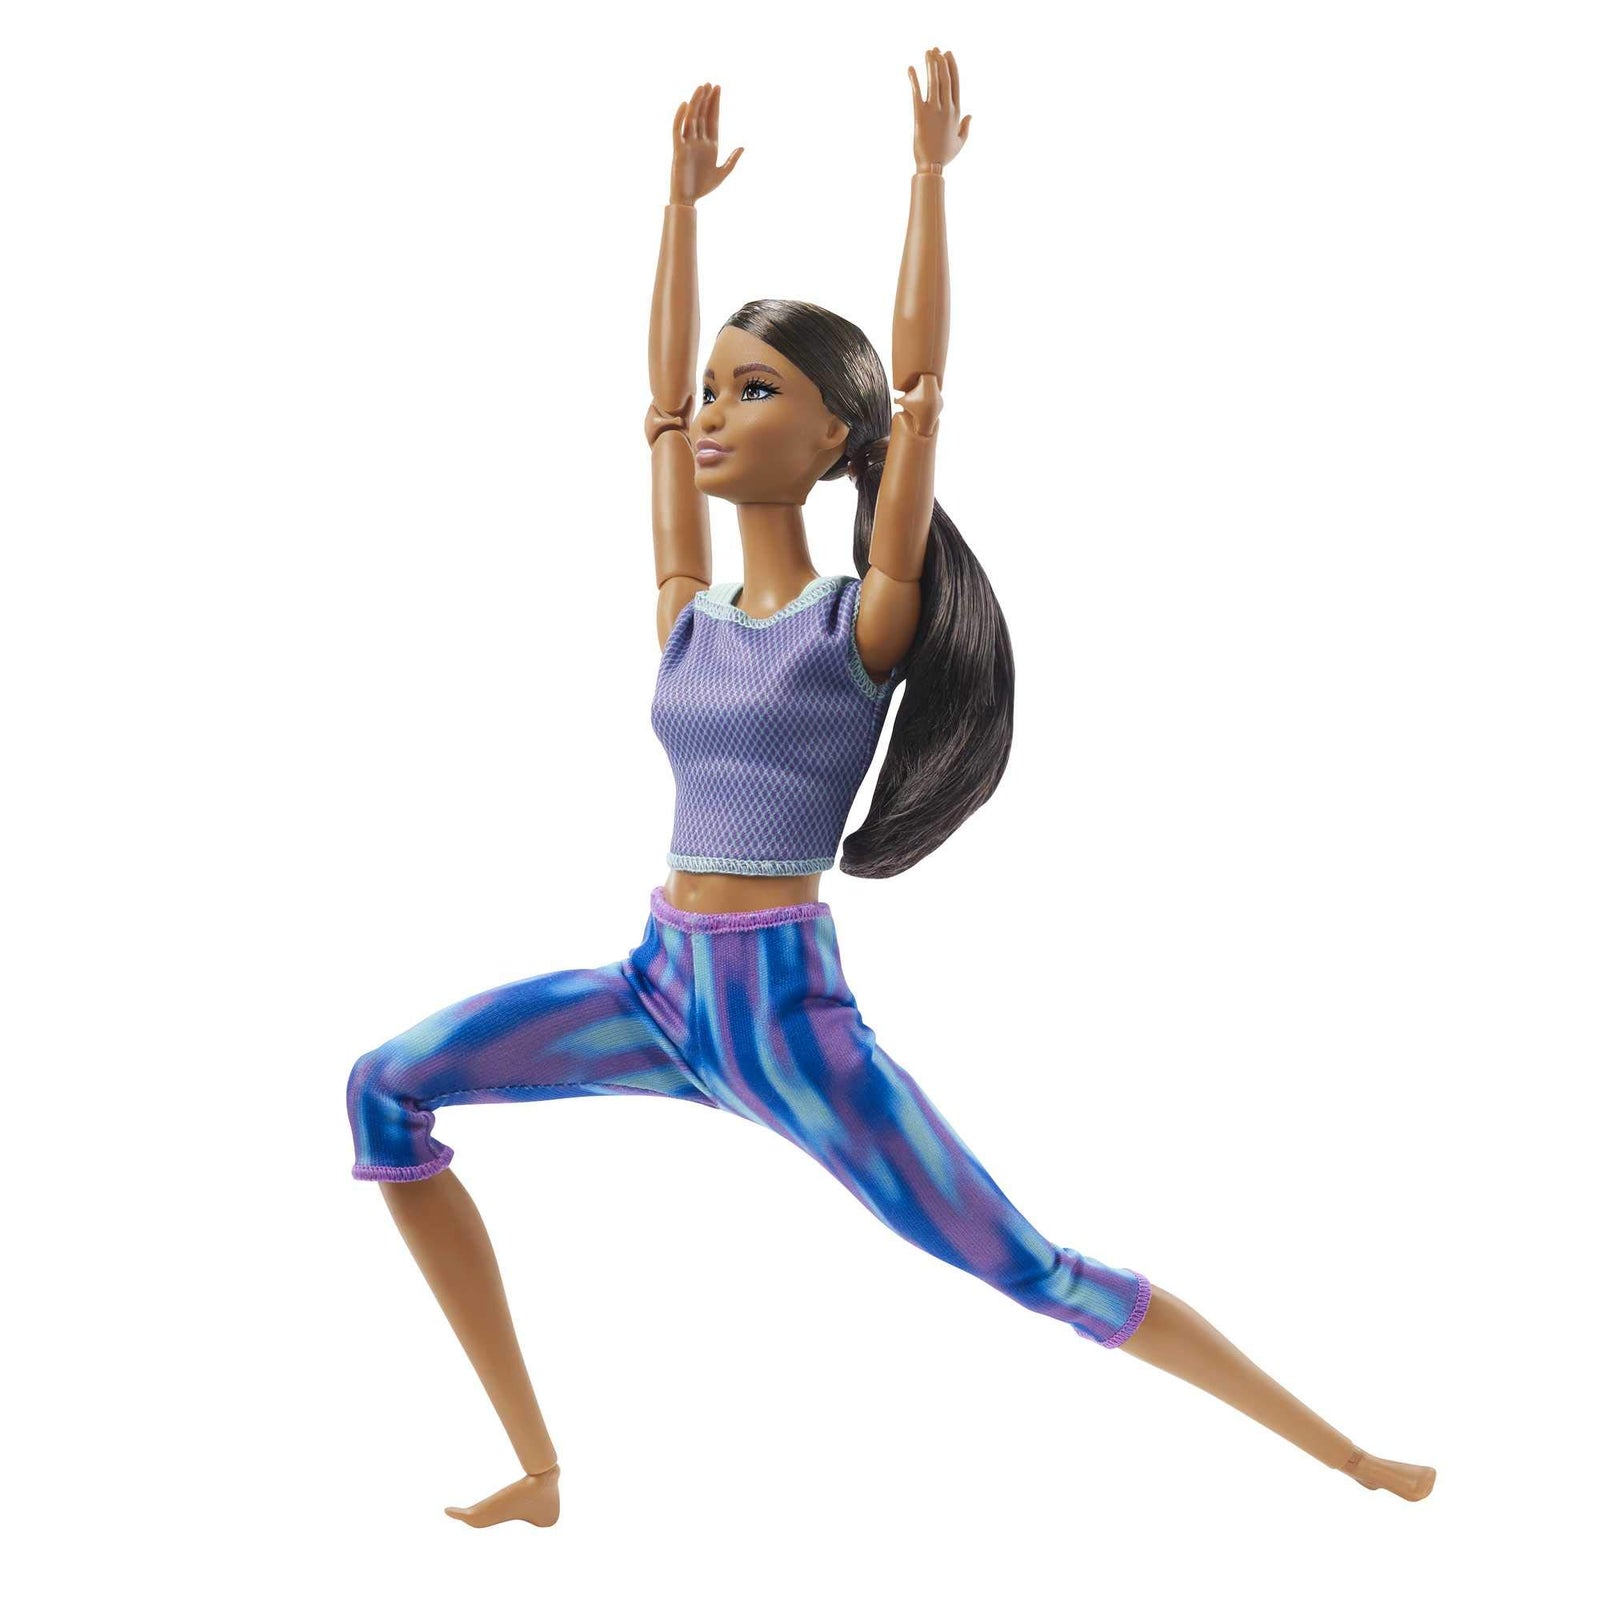 Barbie Made to Move Doll with 22 Flexible Joints & Curly Brunette Ponytail Wearing Athleisure-wear for Kids 3 to 7 Years Old